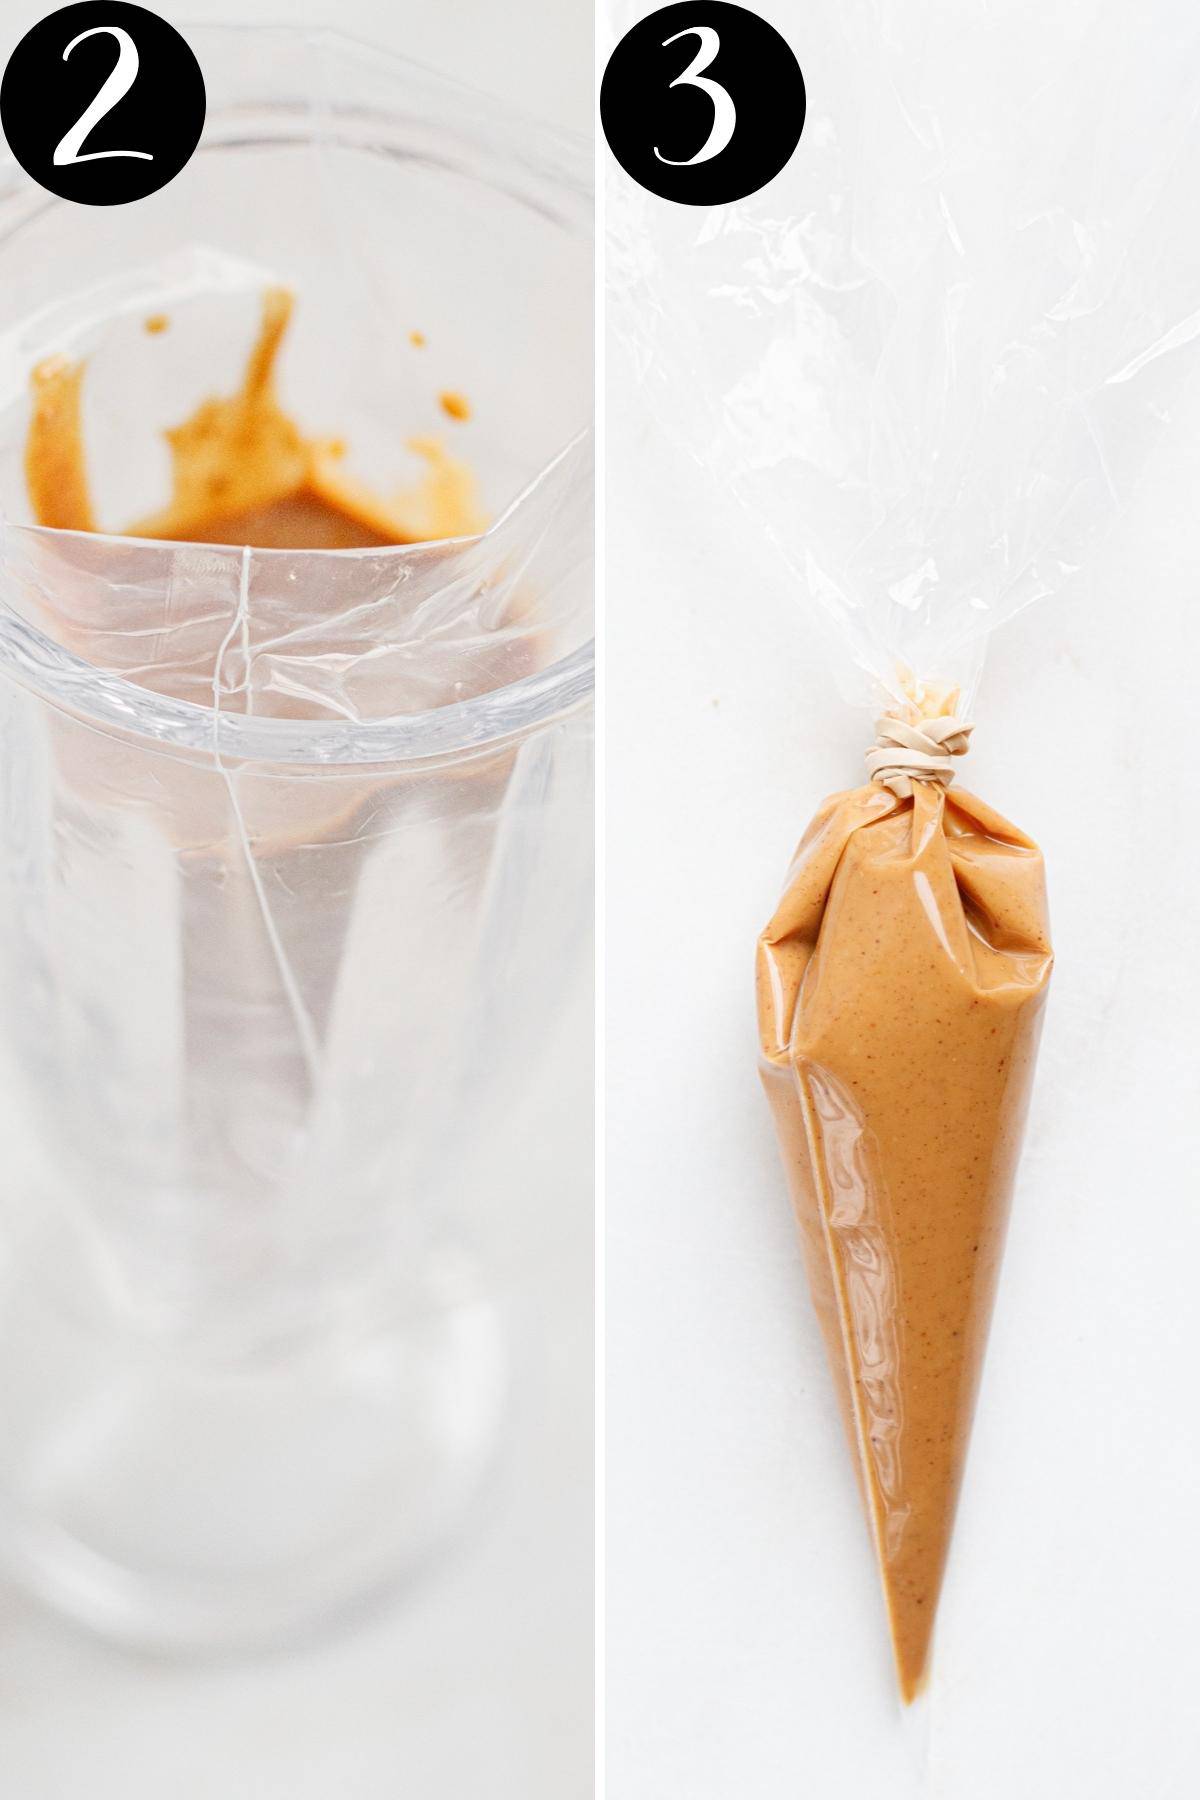 Two images of how to put peanut butter in a piping bag.